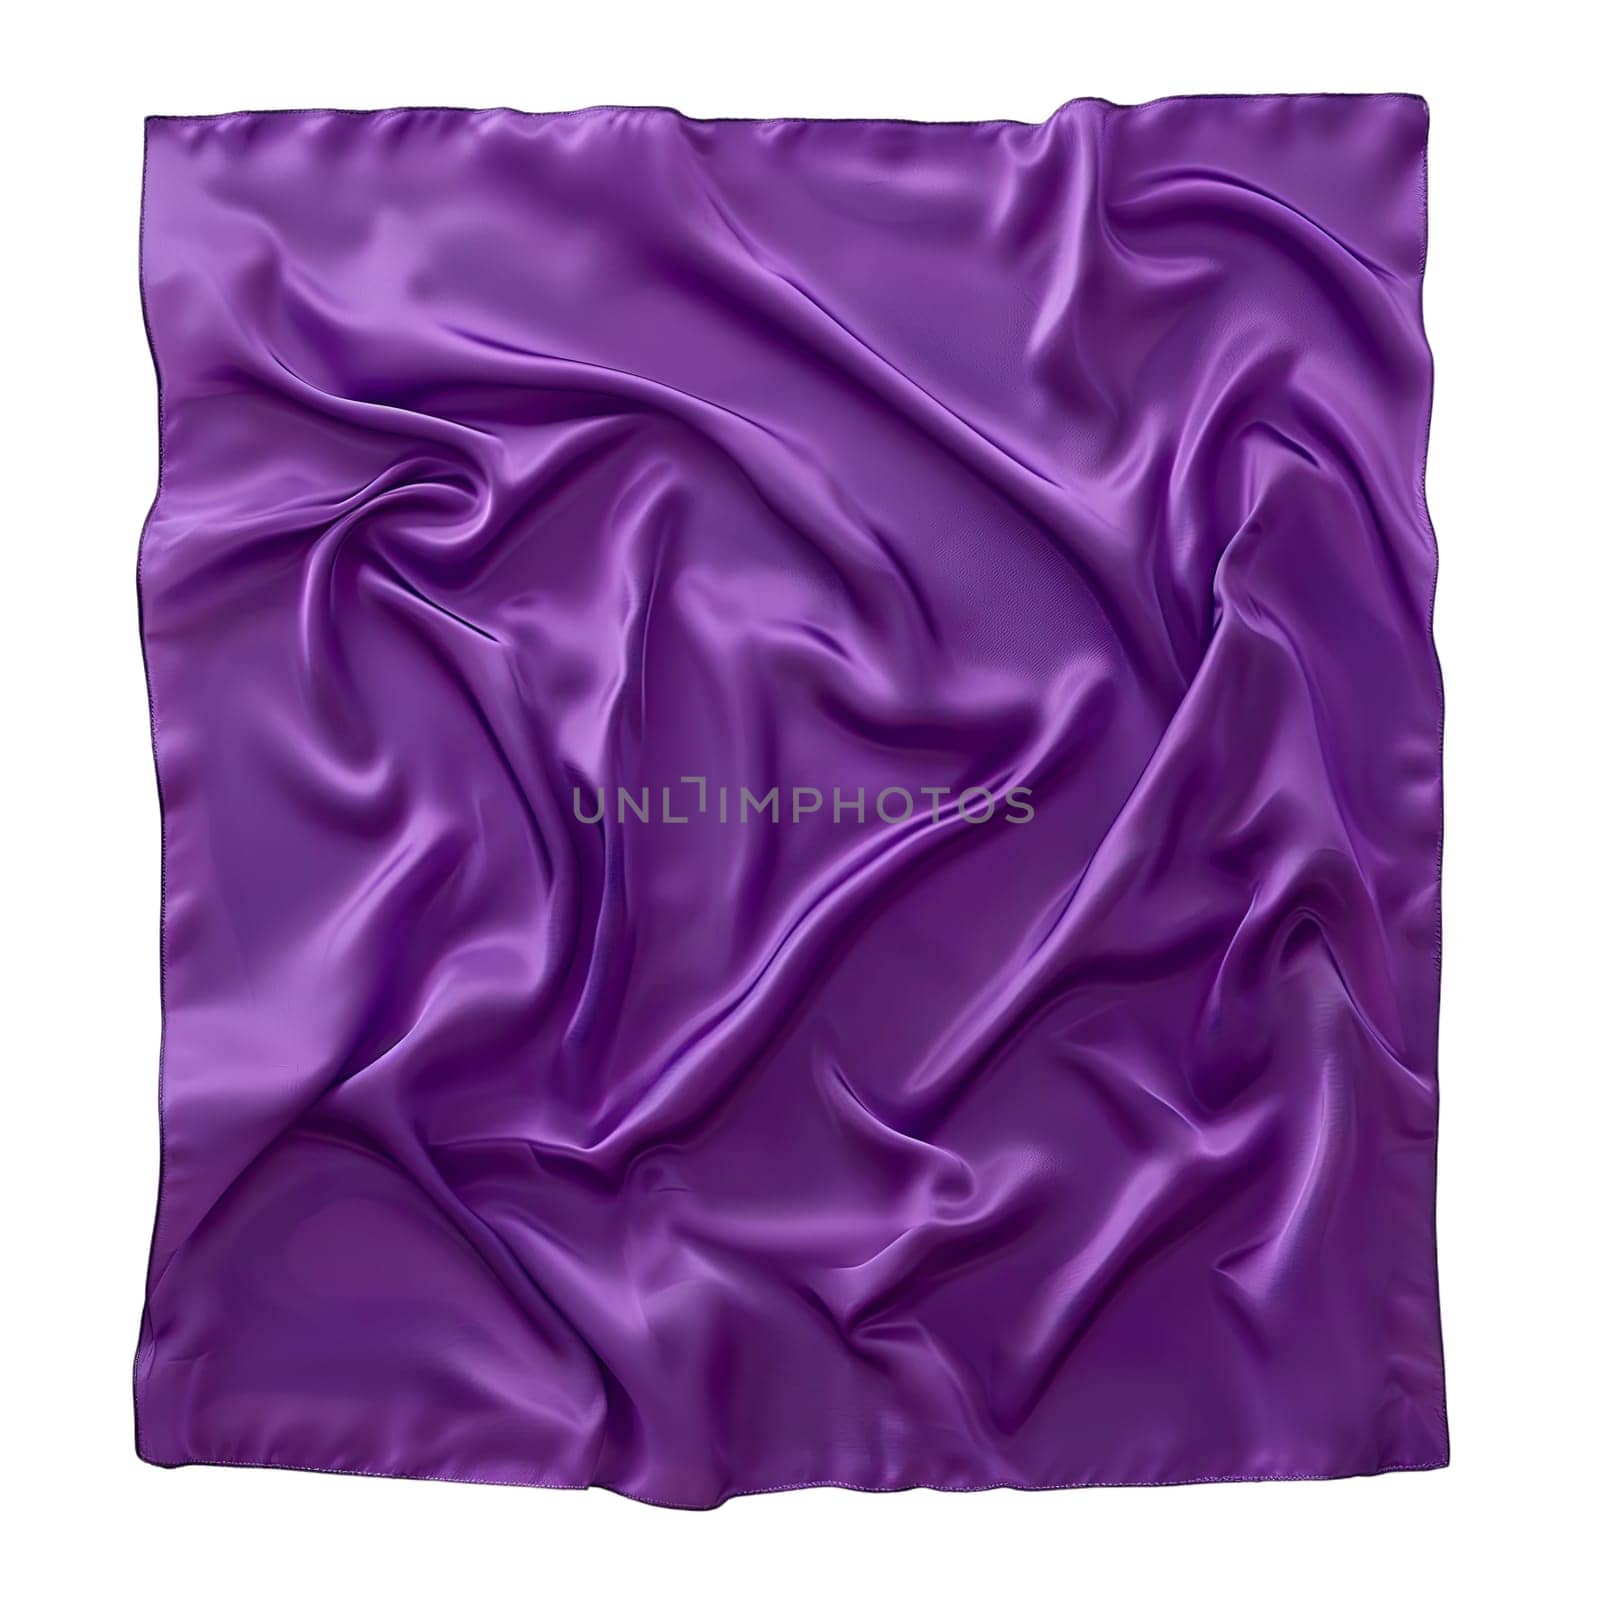 Purple satin cloth crumpled square material by Dustick